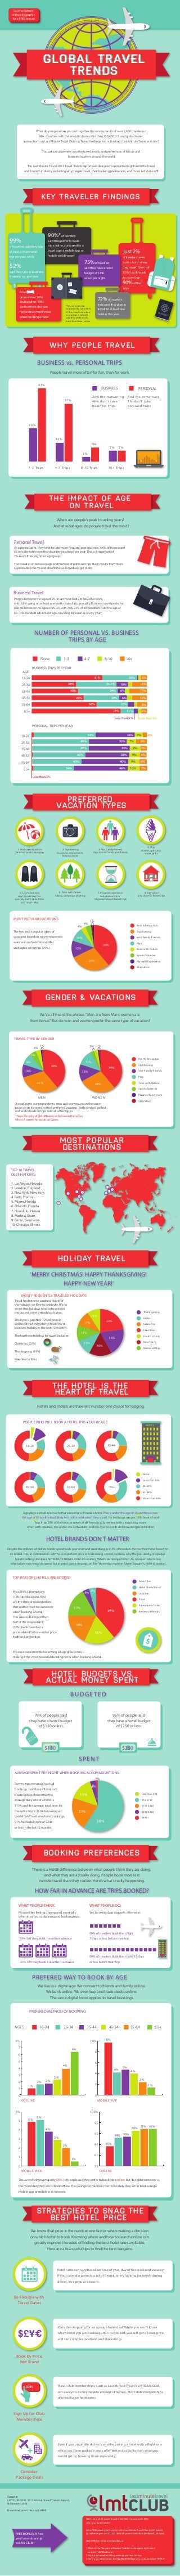 See the bottom
of the infographic
for a FREE bonus!

Global Travel
trends

What do you get when you put together the survey results of over 2,600 travelers in
80+ countries with the analytics from more than 250,000 U.S. and global travel
transactions on Last Minute Travel Club’s (a Travel Holdings, Inc. subsidiary) Last Minute Travel website?
You get a unique view into the travel trends and preferences of leisure and
business travelers around the world.
The Last Minute Travel 2013 Travel Trends Report was designed to provide insights into the travel
and tourism industry, including why people travel, their booking preferences, and more. Let’s take off!

KEY TRAVEleR FINDINGS

90%* of travelers

99%

said they prefer to book

of travelers said they take

trips online, compared to a

at least one personal

travel agent, mobile app or

trip per year, while

mobile web browser.

Just 2%
of travelers never

75% of travelers

52%

book a hotel when

said they have a hotel
budget of $150

business trip per year.

(53%) book hotels

or less per night.

said they take at least one

they travel. Over half
for more than

90% of their
trips.

Price (39%),
promotions (18%)

72% of travelers

and location (18%)

indicated they plan to

*Yes, we were also
surprised that only 90%
of the people we asked
on our travel website
said they preferred to
book their travel online.

are the three decision
factors that matter most
when booking a hotel.

travel for at least one
holiday this year.

WHY PEOPLE TRAVEL
BUSINESS vs. PERSONAL TRIPS
People travel more often for fun, than for work.
47%

BUSINESS

PERSONAL

And the remaining
48% don't take
business trips

37%

And the remaining
1% don't take
personal trips
9%

12%

30%

47%

48%

37%

12%
30%

9%

7%

7%

3%

1 - 3 Tr i p s

4 - 7 Tr i p s

8 - 1 0 Tr i p s

1 0 + Tr i p s

The impact of age
on travel
When are people’s peak traveling years?
And at what ages do people travel the most?

Personal Travel
As a person ages, they tend to take more frequent personal trips. 64% of those aged
65 or older take more than four personal trips per year. This is a minimum of
7% more than any other age group.
The correlation between age and number of personal trips likely results from more
expendable income and downtime as individuals get older.

Business Travel
People between the ages of 25-34 are most likely to travel for work,
with 62% going on at least one work-related trip annually. Business travel peaks for
people between the ages of 25-34, with only 23% of respondents over the age of
65--the standard retirement age–traveling for business every year.

NUMBER OF PERSONAL VS. BUSINESS
TRIPS BY AGE
None

1-3

4-7

8-10

10+

BUSINESS TRIPS PER YEAR

AGE

61%

18-24

30%

38%

25-34

35.1%

40%

35-44
45-54

10%

12%

6%

34%

45%

15%

30%

55-64

5%

6%
27%

56%

65+

12%
8%

77%

11%

5%

Less than 5%

Less than 5%

PERSONAL TRIPS PER YEAR
53%

18-24
25-34

49%

35-44

34%
32%

49%

9%

9%

5%

38%

9%

6%

40%

9%

6%

46%

10%

7%

43%

55-64
34%

65+

7%

4%

35%

45%

45-54

7%

Less than 2%

Preferred
vacation types

1. Rest and relaxation
beaches, pools, lounging

2. Sightseeing
museums, monuments,
historical sites

5. Sports/extreme
any trip relating to a
sporting event or extreme
sporting hobby

6. Time with nature
hiking, camping, canoeing

4. Play
theme parks and
water parks

3. Visit family/friends
trips to visit family and friends

7. Planned experience
volunteer work or
religious/mission-based trips

MOST POPULAR VACATIONS

1%

4%

4%

8. Staycation
any close-to-home trips

Rest & Relaxation

The two most popular types of

Sightseeing

vacations based on survey responses

10%

Visit Family/Friends

were rest and relaxation (39%)
and sightseeing trips (29%).

Play

39%

12%

Time with Nature
Sports/Extreme

29%

Planned Experience
Staycation

GENDER & VACATIONS
We’ve all heard the phrase: “Men are from Mars; women are
from Venus.” But do men and women prefer the same type of vacation?

TRAVEL TYPE BY GENDER
4%

1%

3% 1%

5%
9%

Rest & Relaxation

12%
39%

Sightseeing

39%

10%

Visit Family/Friends

13%

Play

31%

Time with Nature

28%

Sports/Extreme

MEN

Planned Experience

WOMEN

Staycation

According to our respondents, men and women are on the same
page when it comes to their preferred vacation. Both genders picked
rest and relaxation trips over all other types.
There are only slight differences between the sexes
when it comes to vacation types.

most popular
Destinations
TOP 10 TRAVEL
DESTINATIONS:
1. Las Vegas, Nevada
2. London, England
3. New York, New York
4. Paris, France
5. Miami, Florida
6. Orlando, Florida
7. Honolulu, Hawaii
8. Madrid, Spain
9. Berlin, Germany
10. Chicago, Illinois

2
10

1

3
6

9

4

8

5

7

HOLIDAY TRAVEL
‘MERRY CHRISTMAS! HAPPY THANKSGIVING!
HAPPY NEW YEAR!’
MOST FREQUENTLY TRAVELED HOLIDAYS
Travel has become a natural staple of
the holidays we love to celebrate. It’s no
secret that holidays tend to be among
the busiest travel periods each year.

Thanksgiving

9%
11%

The hype is justified. 72% of people
indicated that they plan to travel for at
least one holiday in the next 12 months.

19%
23%

11%
16%

Christmas

19%
16%
11%

11%

Christmas (23%)

Labor Day

11%

11%
9%

The top three holidays for travel includes:

Easter

Fourth of July
New Year’s

23%
16%

Memorial Day

Thanksgiving (19%)
New Year’s (16%)

The Hotel is the
heart of Travel
Hotels and motels are travelers’ number one choice for lodging.

PEOPLE WHO WILL BOOK A HOTEL THIS YEAR BY AGE

18-24

HOTEL

35-44

25-34

None
Less than 25%

45-54

55-64

26-60%

65+

61-89%
More than 90%

Age plays a small role in whether a traveler will book a hotel. Those under the age of 25 and those over
the age of 65 are the least likely to book a hotel when they travel. For both age ranges, 18% book a hotel
less than 25% of the time, or never at all. Anecdotally, we see both groups stay more
often with relatives, the under 25s with adults, and the over 65s with children and grandchildren.

HOTEL BRANDS DON’T MATTER
Despite the millions of dollars hotels spend each year on brand marketing, just 4% of travelers choose their hotel based on
its brand. This, in combination with how important price is to choosing a hotel, explains why the popularity of opaque
hotel booking sites like LASTMINUTETRAVEL.COM are soaring. What’s an opaque hotel? An opaque hotel is one
which does not reveal its name, but instead uses a description like “three-star motel in Union Square” until it is booked.

TOP REASONS HOTELS ARE BOOKED
Amenities
Hotel Chain/Brand

4% 4%

Price (39%), promotions

Location

(18%) and location (18%)

Price

are the three decision factors
that matter most to customers

Promotions/Deals

17%

39%

when booking a hotel.

Reviews/Referrals

This means that more than
half of the respondents

18%

(57%) book based on a
price-related factor—either price

18%

itself or a promotion.

Price is a consistent factor among all age groups too—
making it the most powerful deciding factor when booking a hotel.

Hotel budgets Vs.
Actual Money Spent
BUDGETED
79% of people said
they have a hotel budget
of $150 or less.

96% of people said
they have a hotel budget
of $250 or less.

T
NO B
O TUR
D S
DI

$150

$250

SPENT
AVERAGE SPENT PER NIGHT WHEN BOOKING ACCOMMODATIONS:

1%
Survey reponses match actual

4%

bookings. LastMinuteTravel.com

Less than $75

15%

booking data shows that the
average daily rate of a hotel is

$76-$150

$134, and the average total price for

$151-$250

the entire trip is $310. In looking at

21%

$251-$400

LastMinuteTravel.com hotel bookings,

$400+

60%

91% had a daily rate of $250
or less in the last 12 months.

BOOKING PREferences
There is a HUGE difference between what people think they are doing,
and what they are actually doing. People book more last
minute travel than they realize. Here’s what’s really happening.

HOW FAR IN ADVANCE ARE TRIPS BOOKED?
WHAT PEOPLE THINK:

WHAT PEOPLE DO:

No one likes feeling unprepared, especially
when it comes to planning and booking trips.

Yet, booking data suggests otherwise:

50% of travelers book their flight
7 days or less before their trip

69% SAY they book 1month in advance

HOTEL

50% of travelers book their hotel 15 days
23% SAY they book 3 months in advance

or less before their trip

PREFERED WAY TO BOOK BY AGE
We live in a digital age. We connect to friends and family online.
We bank online. We even buy and trade stocks online.
The same digital trend applies to travel bookings.
PREFERED METHOD OF BOOKING

AGES:

18-24

25-34

8%

6%

6
5

55-64

10%

8

4%

5%

4

3

2%

2

2%

65+

6

4%

4

4%

2%

2%
2

1%

0

1%

0

OFFLINE

MOBILE APP

6%
5

45-54

10%

7

1

35-44

100%

5%

5%
95

91%

4%

4

90

89% 90%

3%

3

85

2%

2

92% 92%

85%

80

1

1%

0

75

MOBILE WEB

ONLINE

The overwhelming majority (90%) of people said they prefer to book trips online. But the older someone is,
the more likely they are to book offline. The younger someone is, the more likely they are to book using a
mobile app or mobile web browser.

STrategies to snag the
best hotel priCe
We know that price is the number one factor when making a decision
on which hotel to book. Knowing where and how to search online can
greatly improve the odds of finding the best hotel rates available.
Here are a few useful tips to find the best bargains.

Hotel rates can vary based on time of year, day of the week and vacancy.
If your calendar permits a bit of flexibility, try looking for hotels during
slower, less popular seasons.

Be Flexible with
Travel Dates

$£¥€

Consider shopping for an opaque hotel deal. While you won’t know
which hotel you are booking until it’s booked, you will get a lower price,
and can compare locations and star-ratings.

Book by Price,
Not Brand

JOIN

Travel club memberships, such as Last Minute Travel’s LMTCLUB.COM,
can save you a considerable amount of money. Most club memberships
offer exclusive hotel rates.

Sign Up for Club
Memberships

Even if you originally did not consider pairing a hotel with a flight or a
rental car, some package deals offer better discounts than what you
would get by booking them separately.

Consider
Package Deals

Source:
LMTCLUB.COM, 2013 Global Travel Trends Report,
November 2013.
Download your free copy HERE.
Want the world's lowest travel rates? Want to save up to 55%
when you book hotels?

FREE BONUS: A free
year’s membership
to LMT Club!

Get a FREE year's membership to the Last Minute Travel Club (a $49 value!)
by registering on LMTCLUB.COM with promo code TRAVELTRENDS (all caps!).
Click HERE for a free membership, or
1. Click on the "Become a Member" button in the upper right-hand
corner of LMTCLUB.com.
2. Enter your email and the password you want to use.
3. Enter your information, the TRAVELTRENDS promo code, and click "APPLY."

 